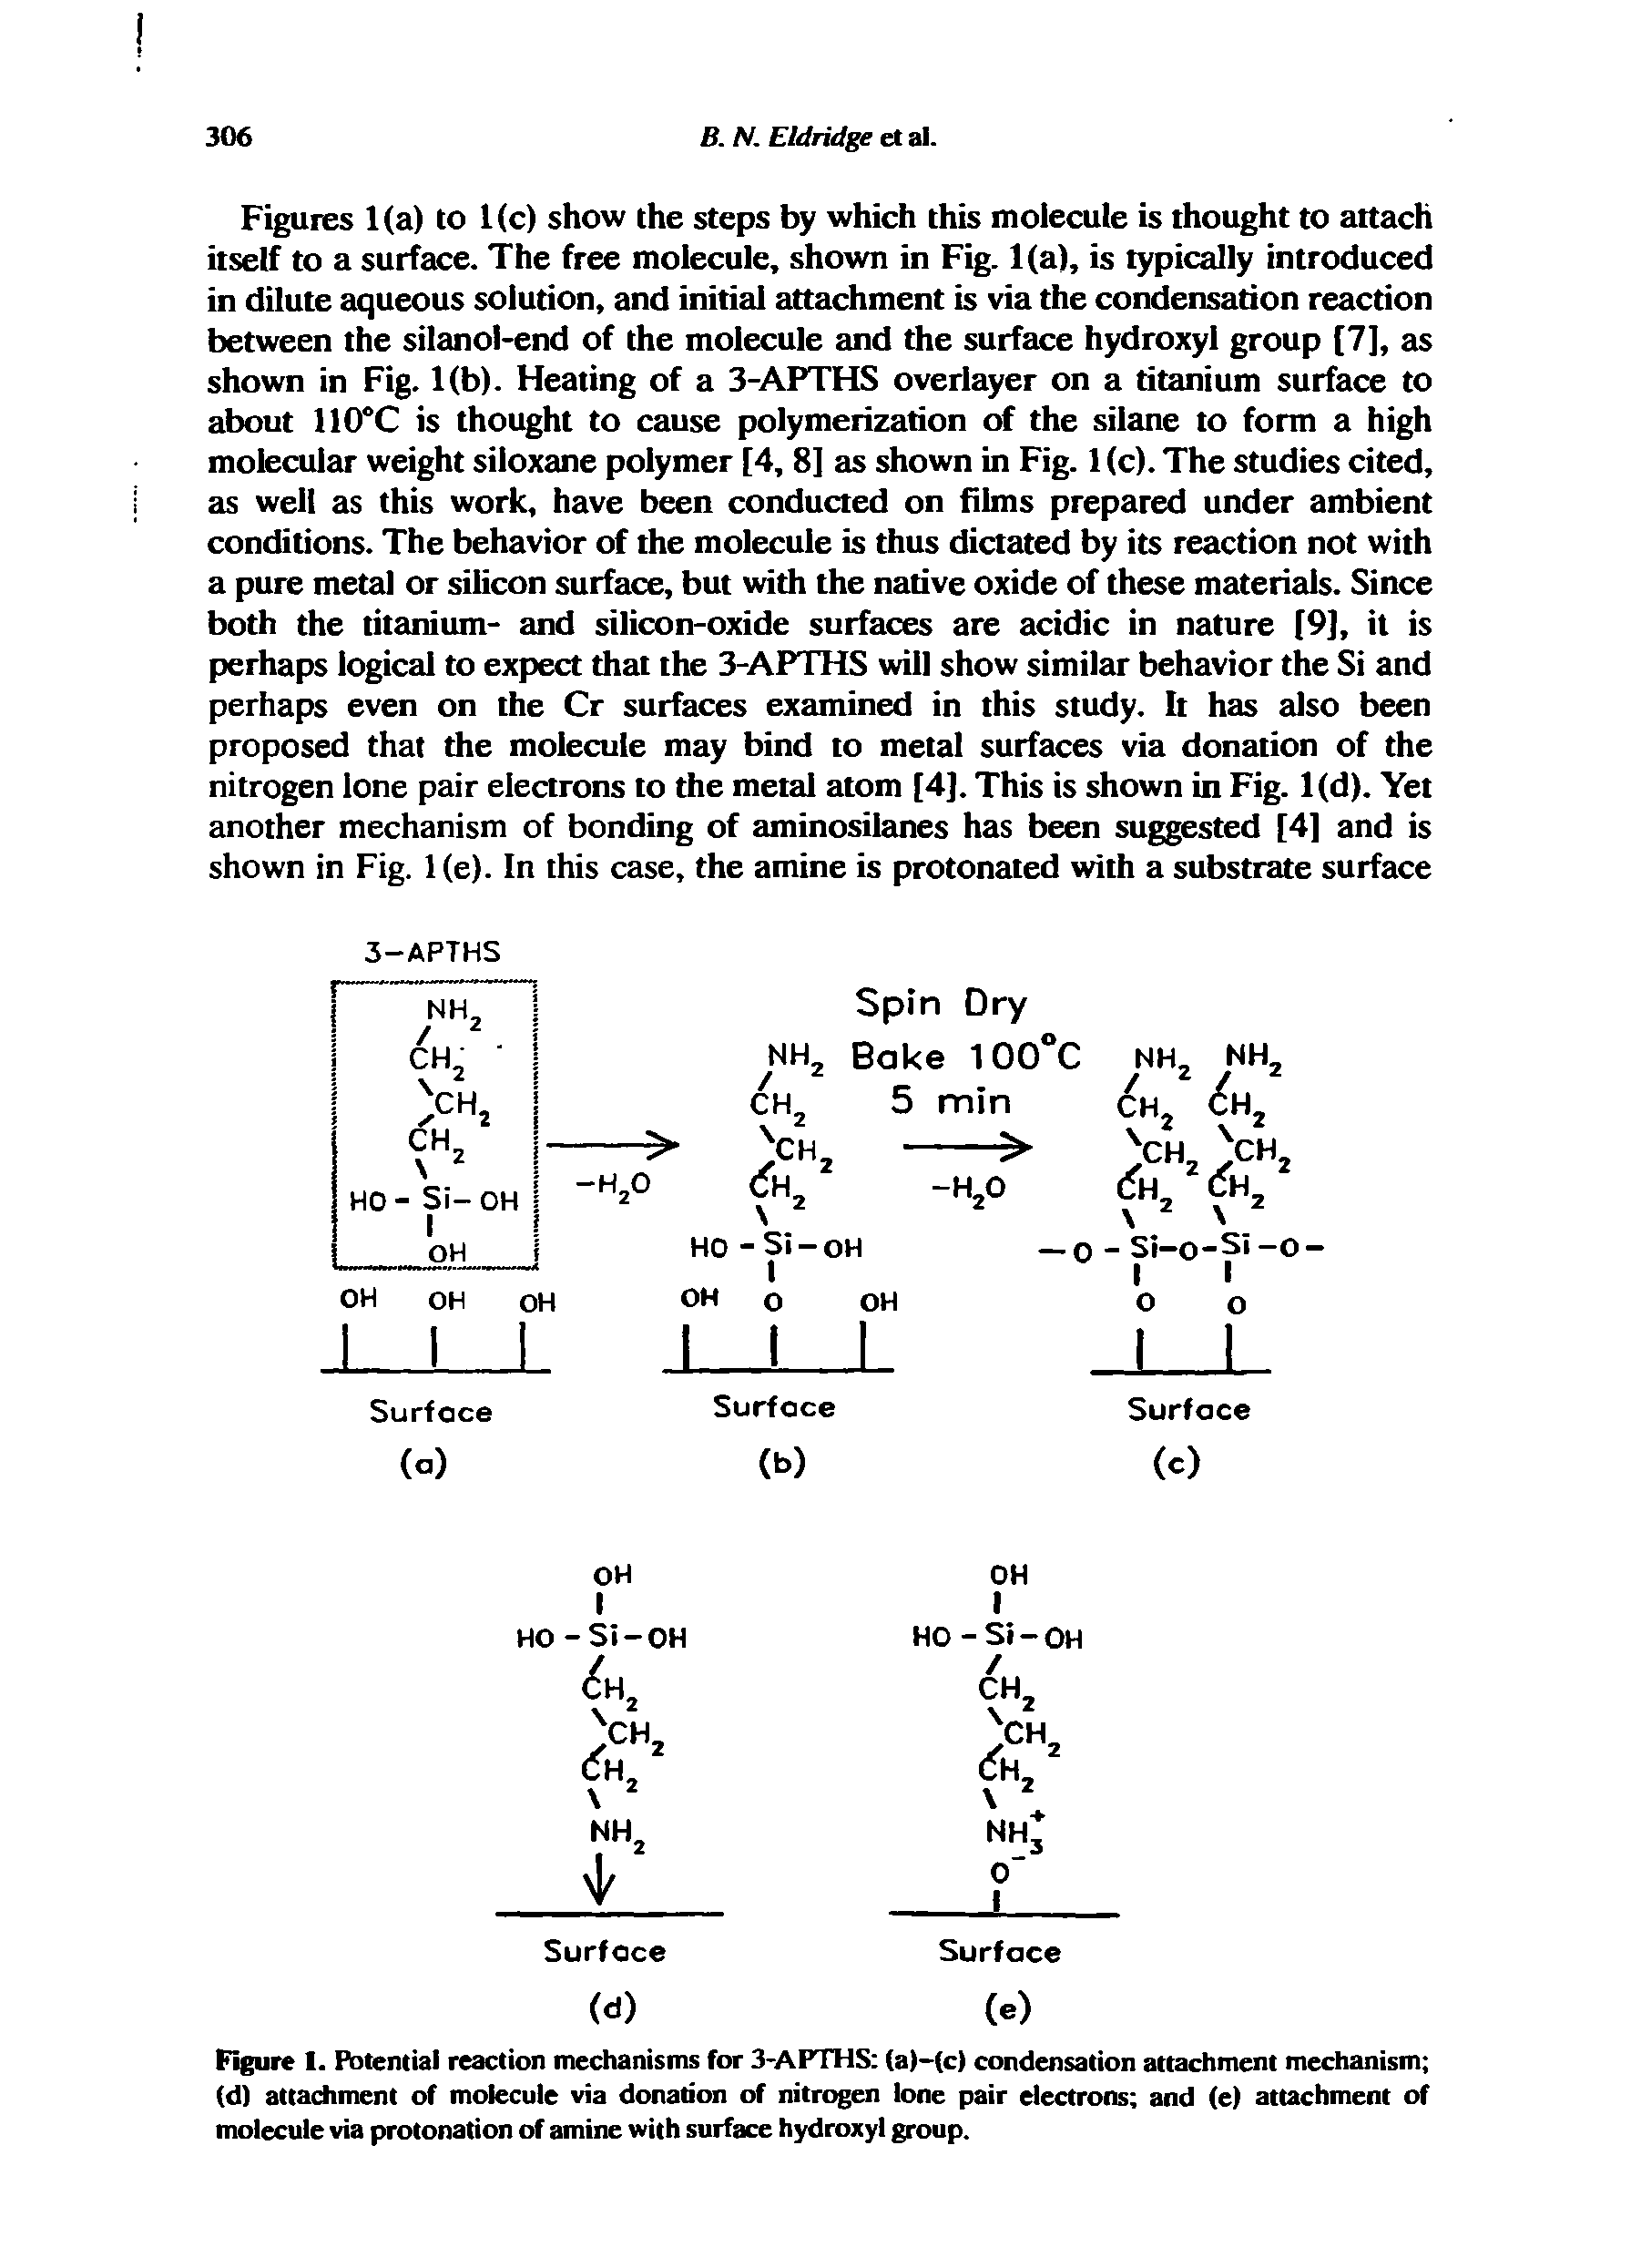 Figure I. Potential reaction mechanisms for 3-APTHS (a)-(c) condensation attachment mechanism (d) attachment of molecule via donation of nitrogen lone pair electrons and (e) attachment of molecule via protonation of amine with surface hydroxyl group.